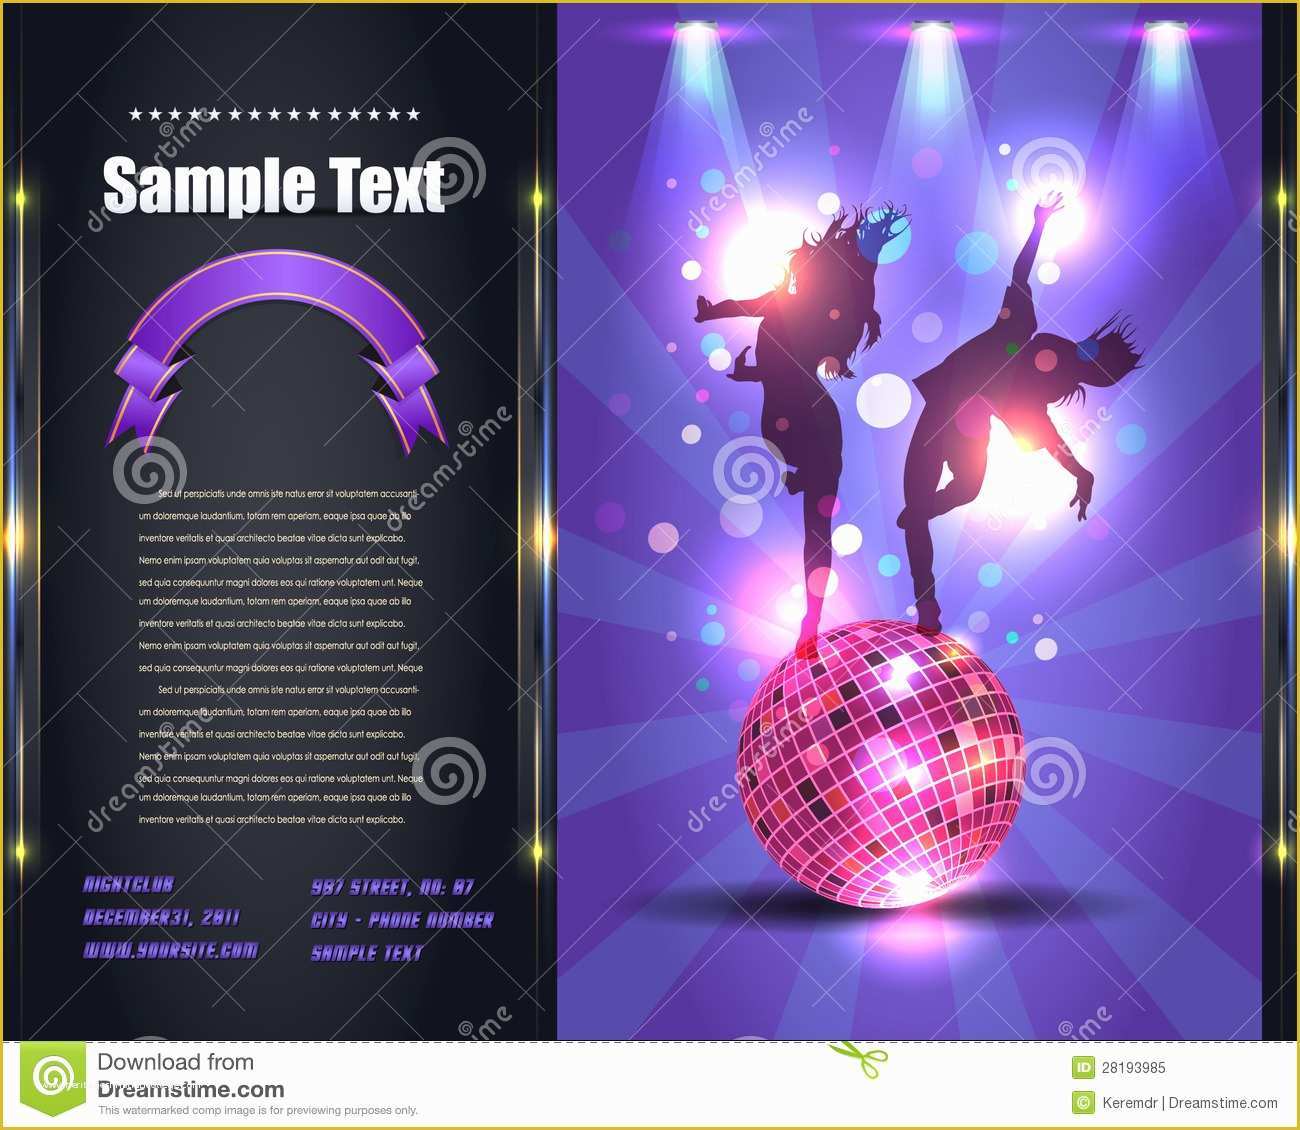 Royalty Free Flyer Templates Of Party Brochure Flyer Vector Template Royalty Free Stock